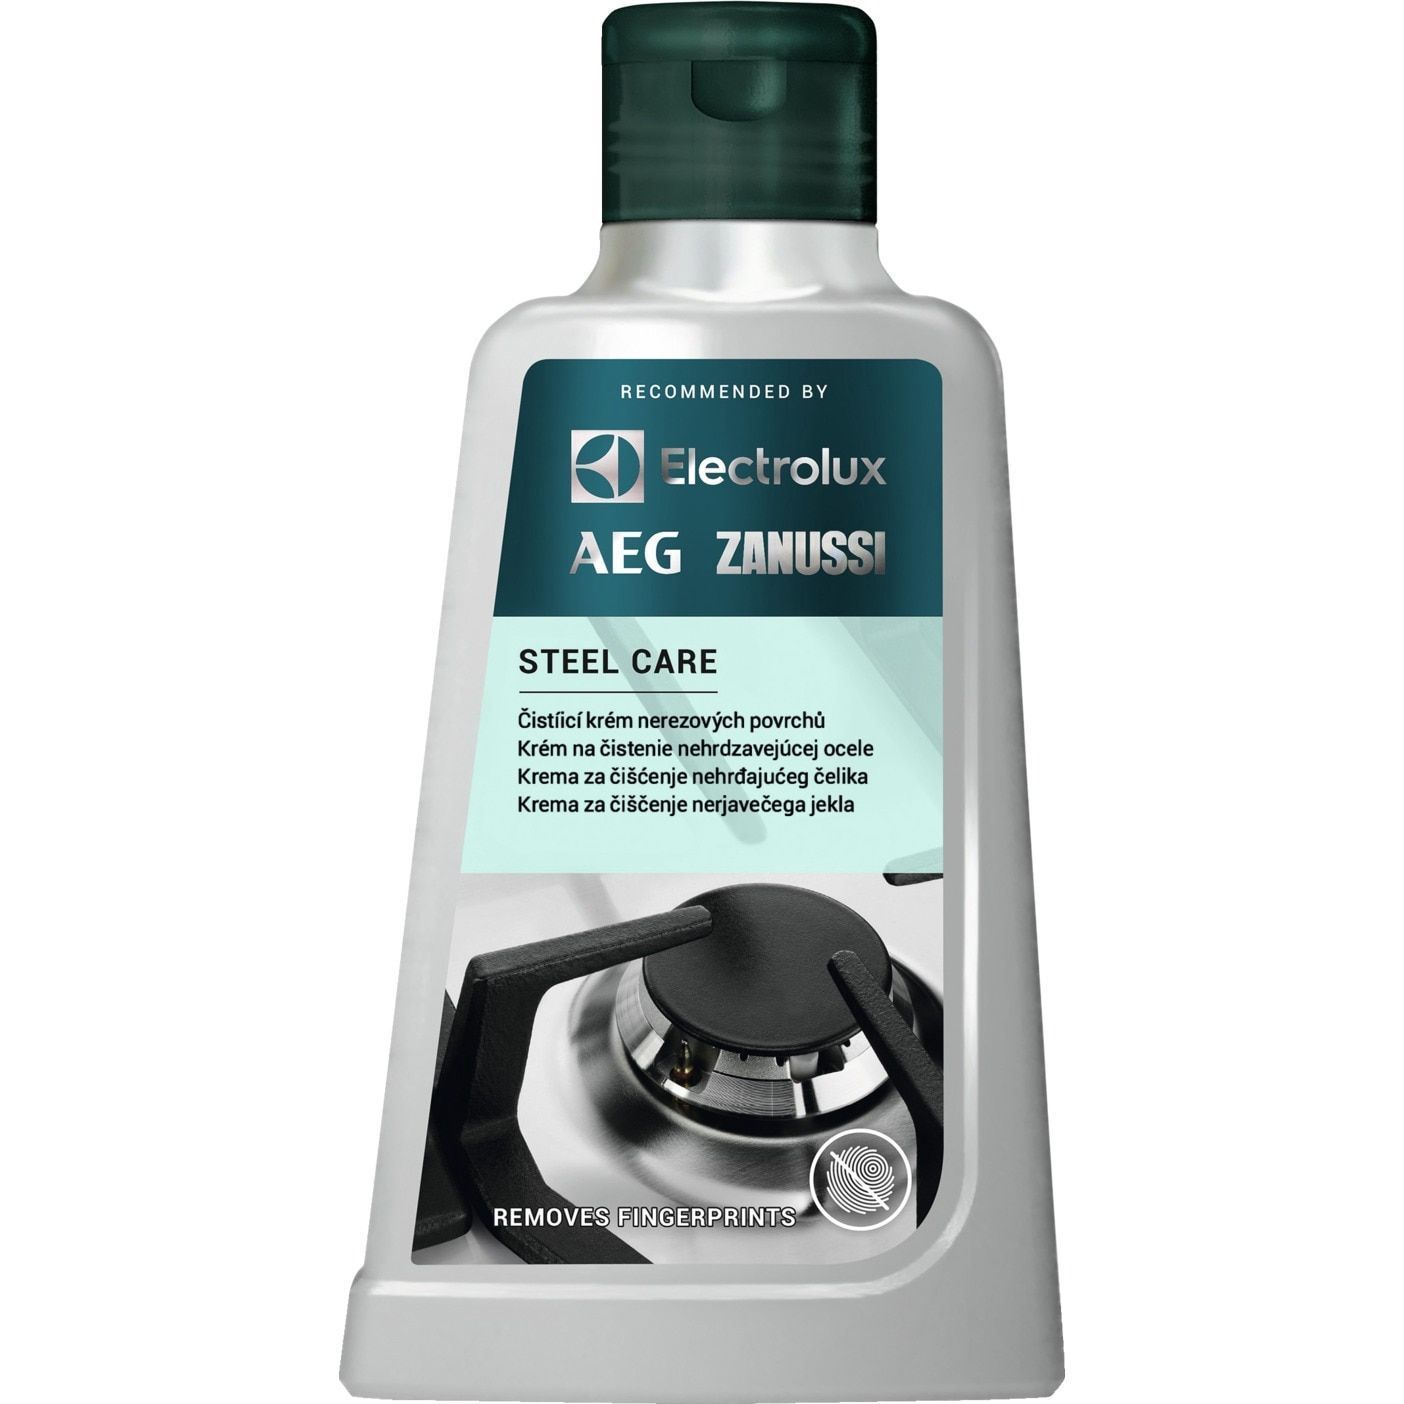 Cleaning Cream for Electrolux AEG Zanussi Stainless Steel Surfaces - 9029799559 AEG / Electrolux / Zanussi